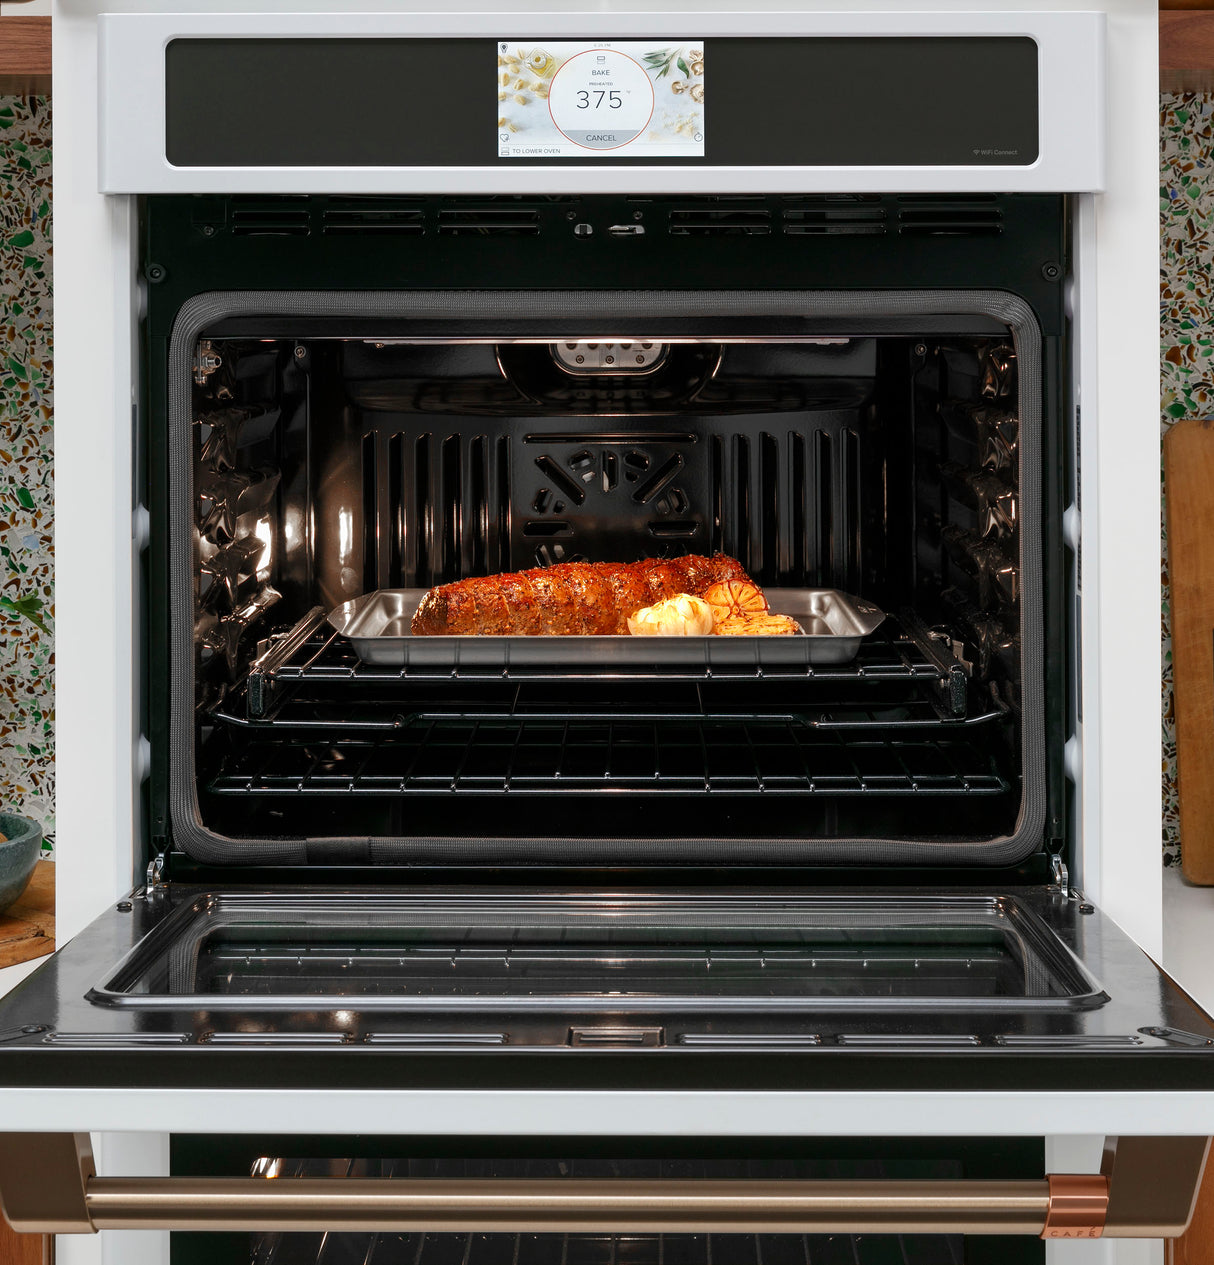 Caf(eback)(TM) Professional Series 30" Smart Built-In Convection Double Wall Oven - (CTD90DP2NS1)